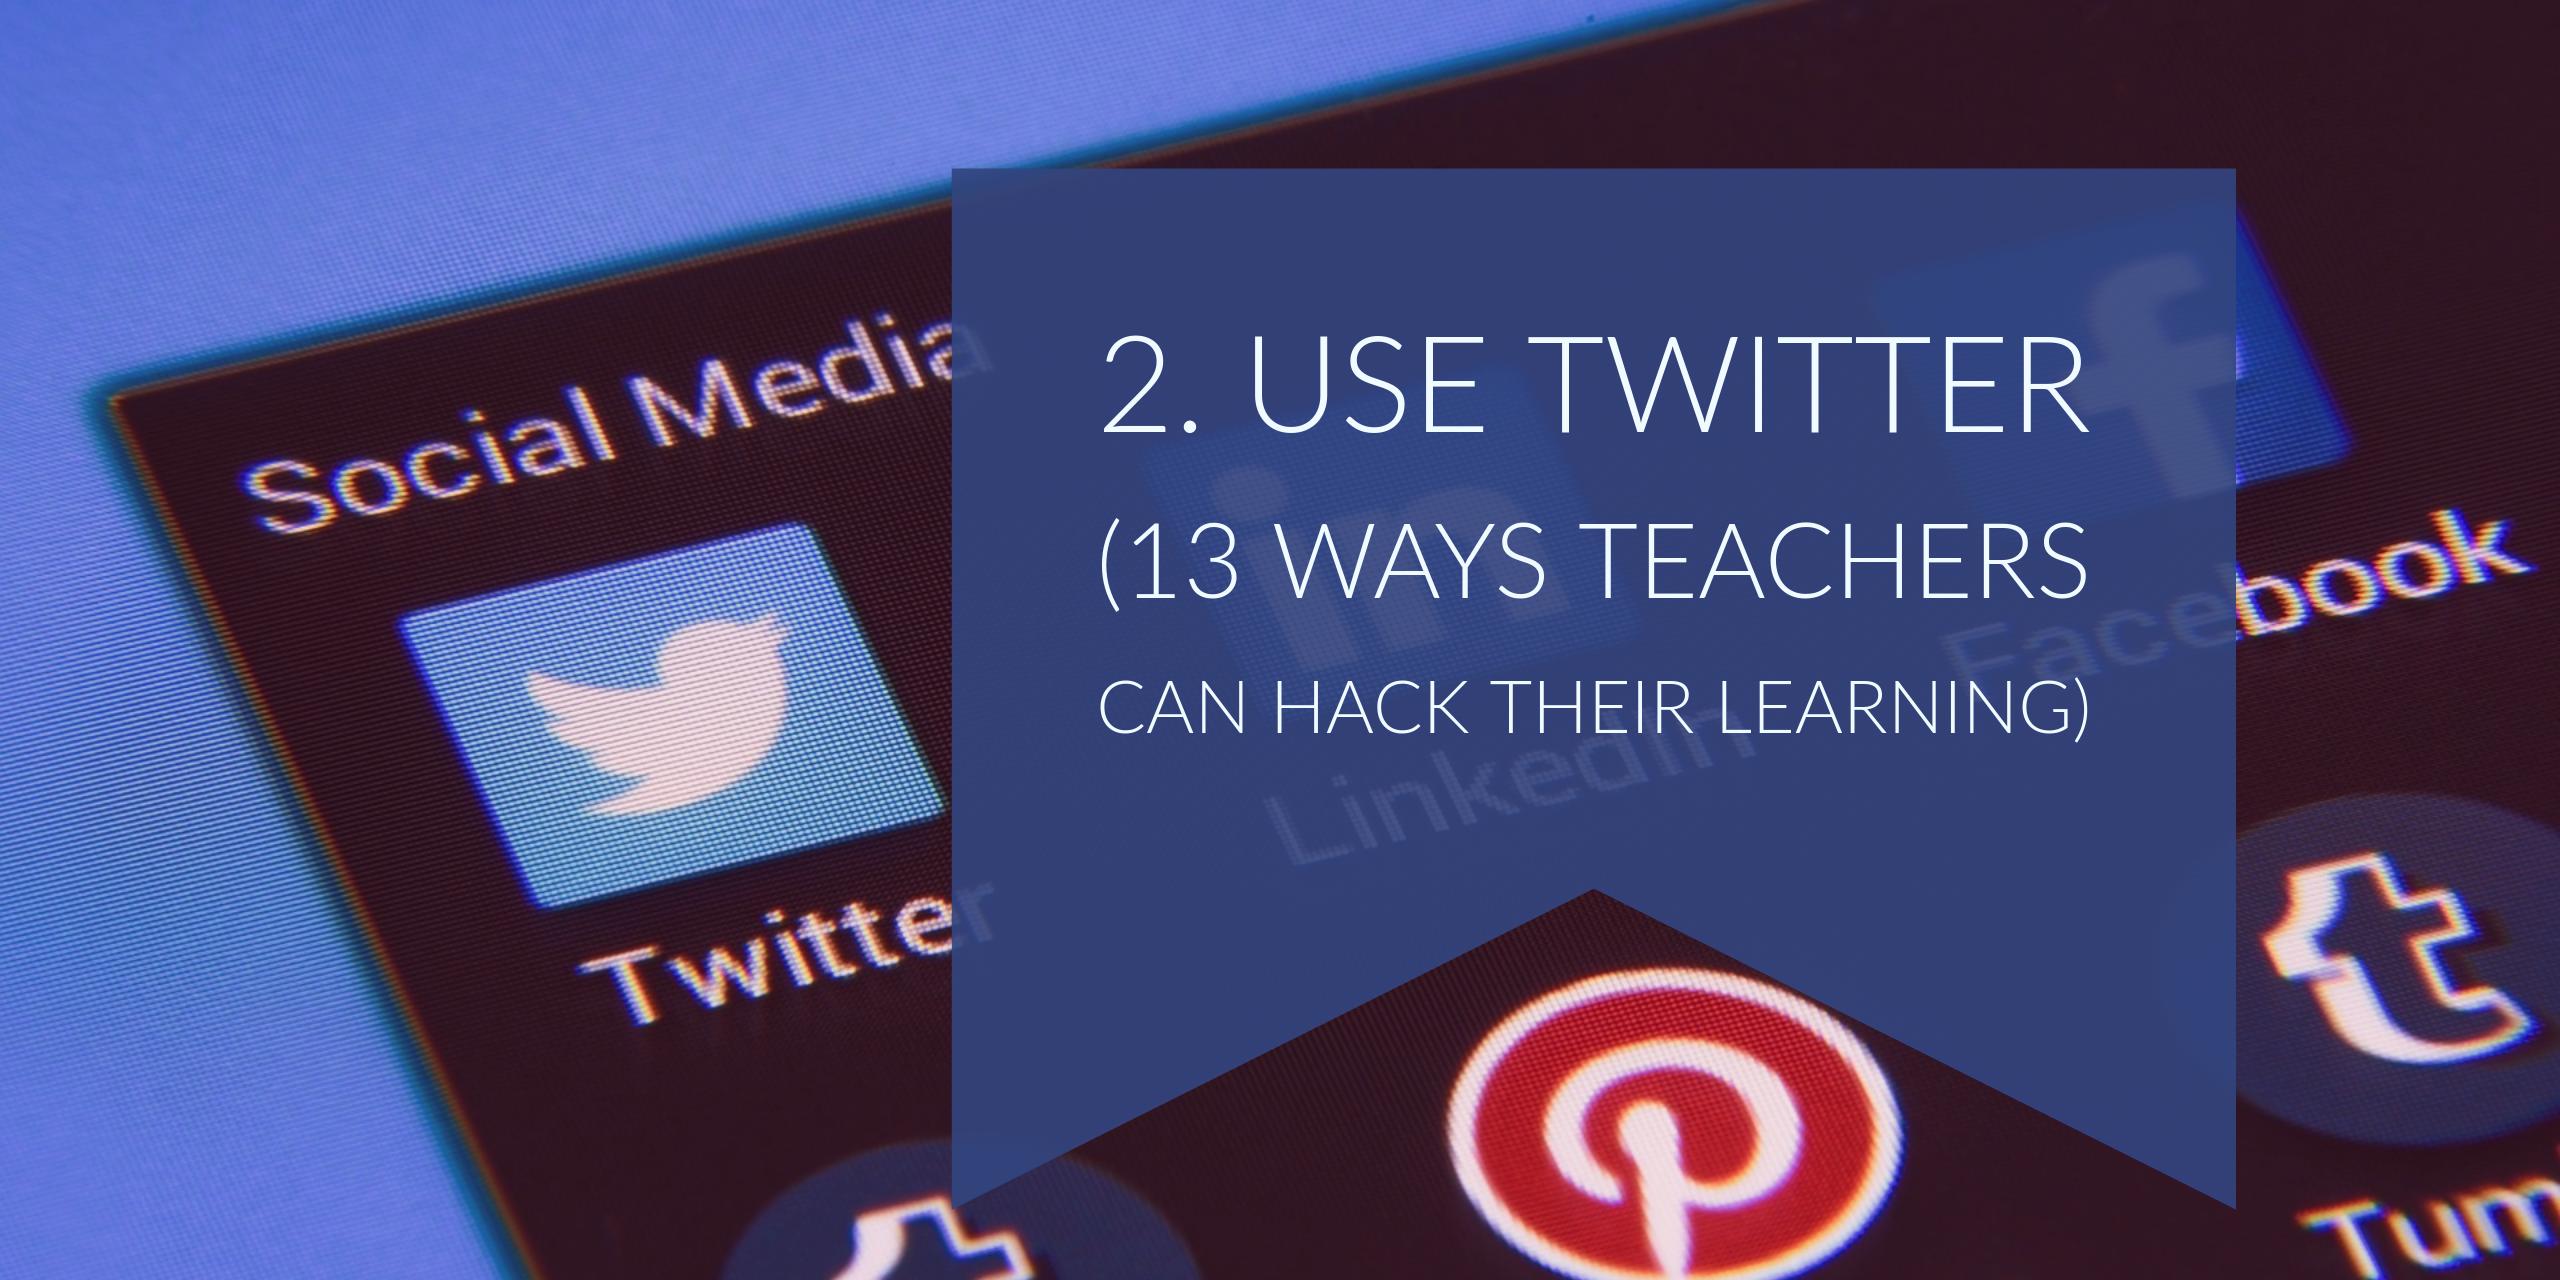 2. Use Twitter (13 Ways Teachers Can Hack Their Learning)